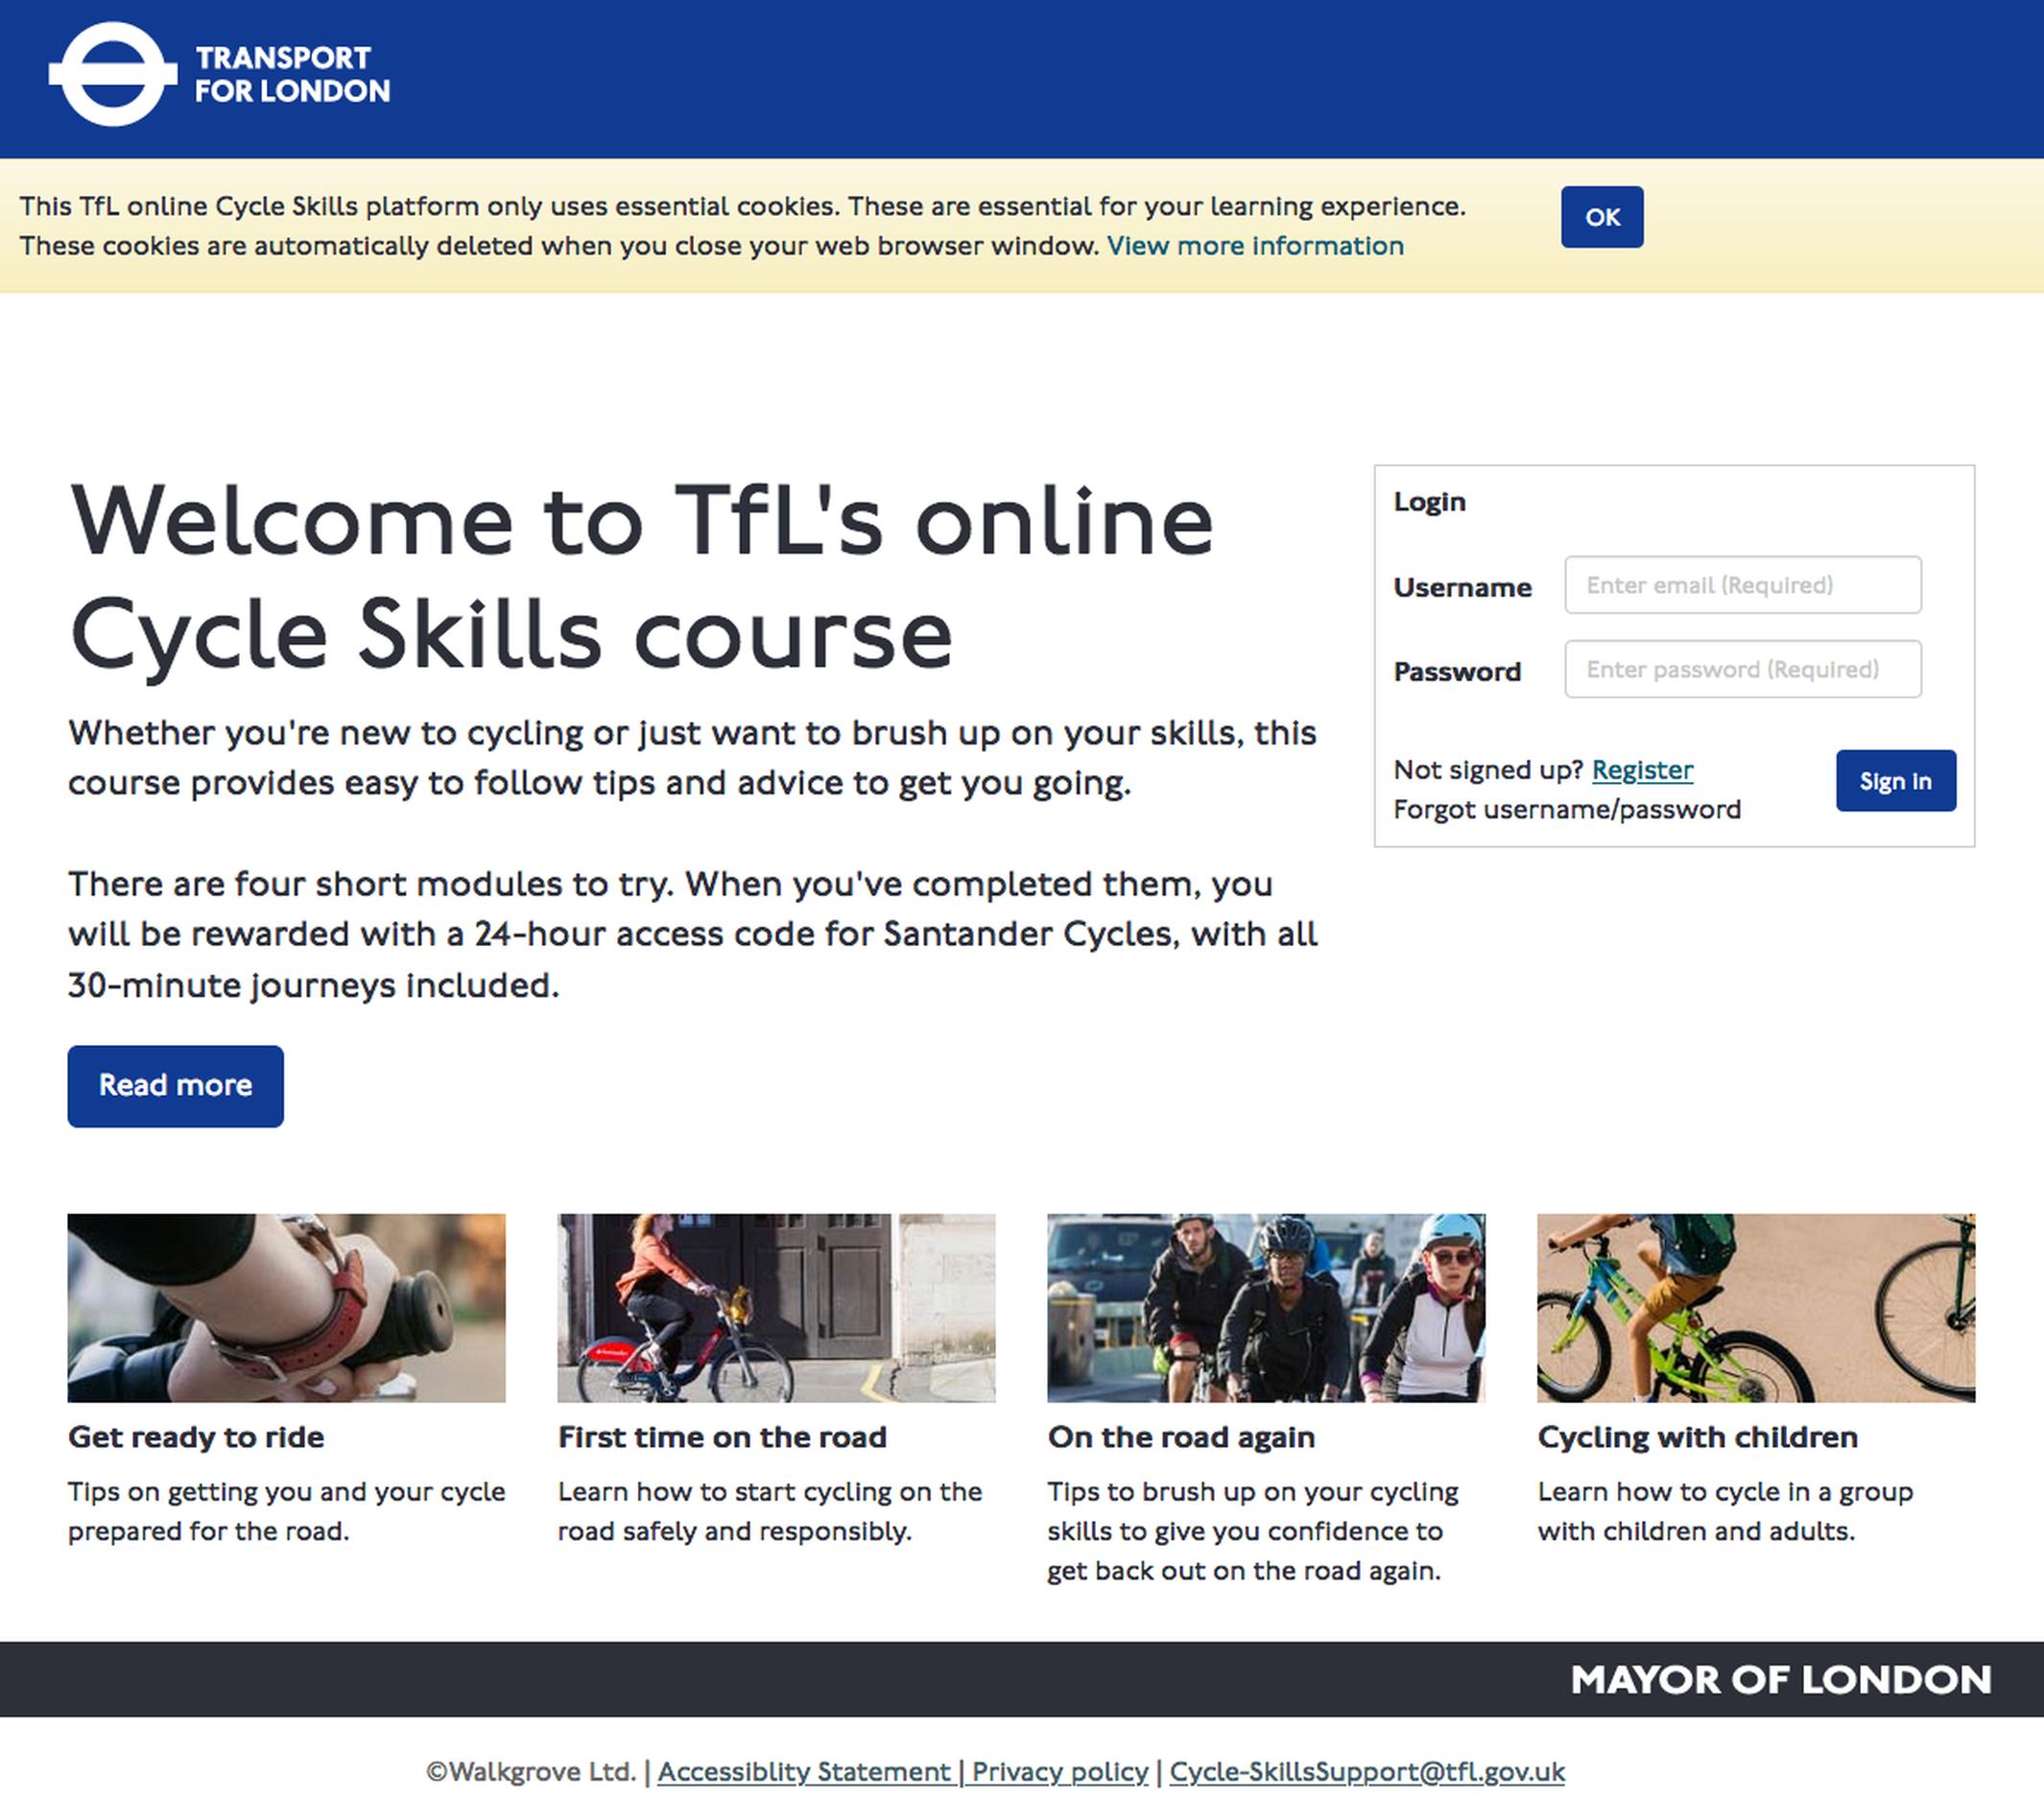 The Cycle Skills course